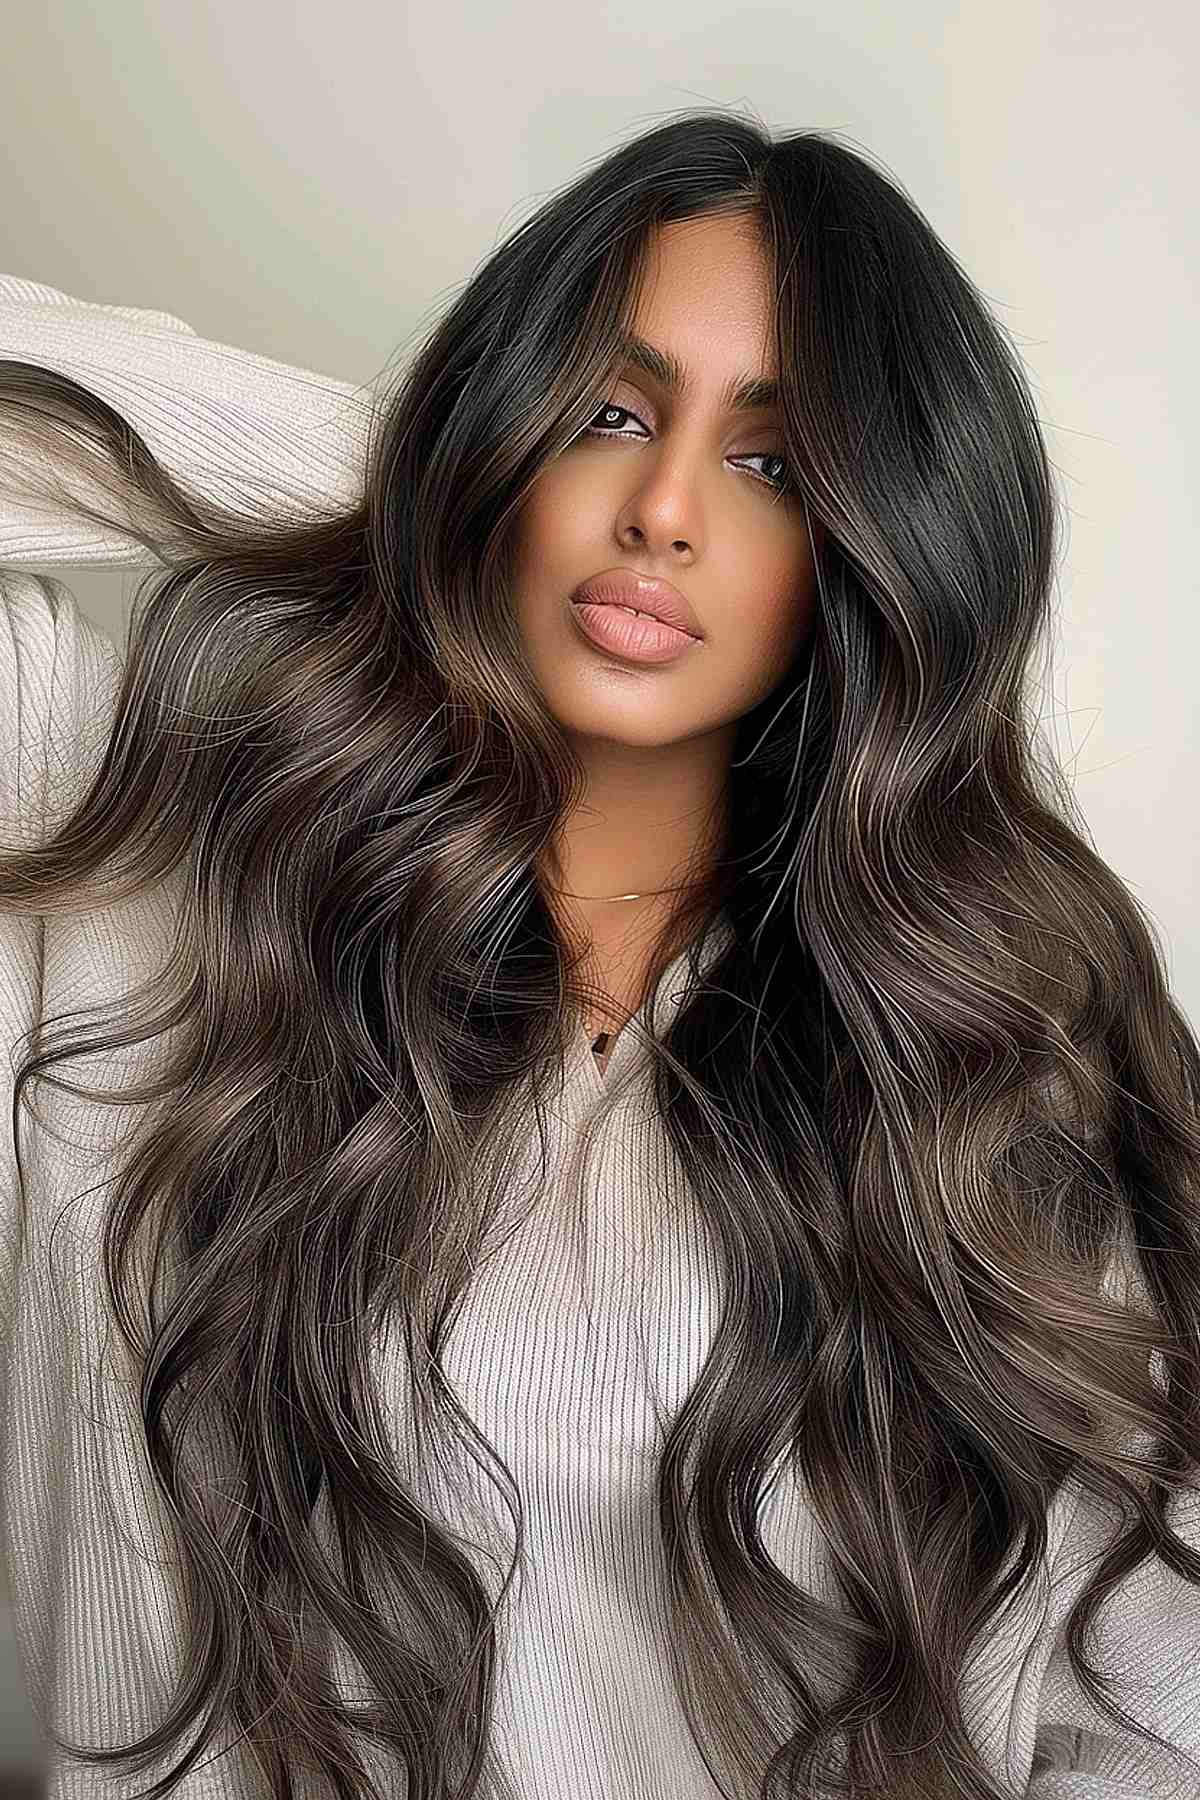 Voluminous dark mushroom brown hair styled in soft waves, enriching the rich, warm hues perfect for medium to dark complexions.